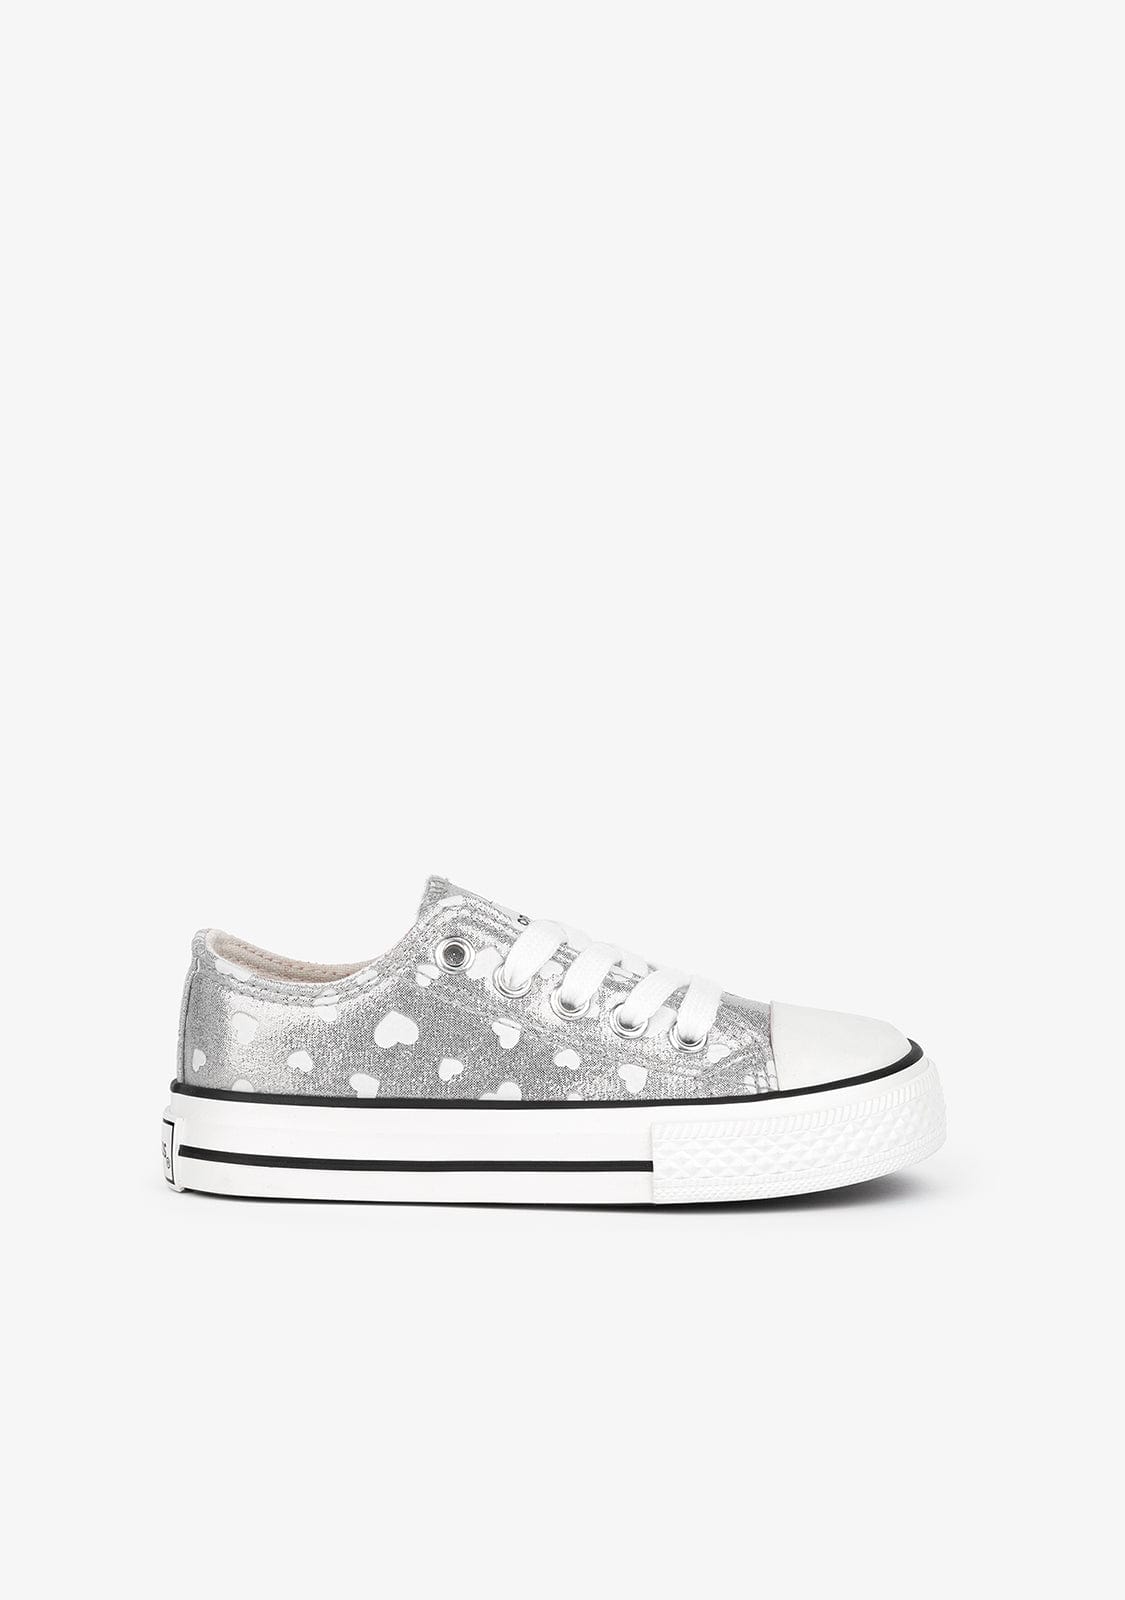 CONGUITOS Shoes Girl's Silver Glows in the Dark Sneakers